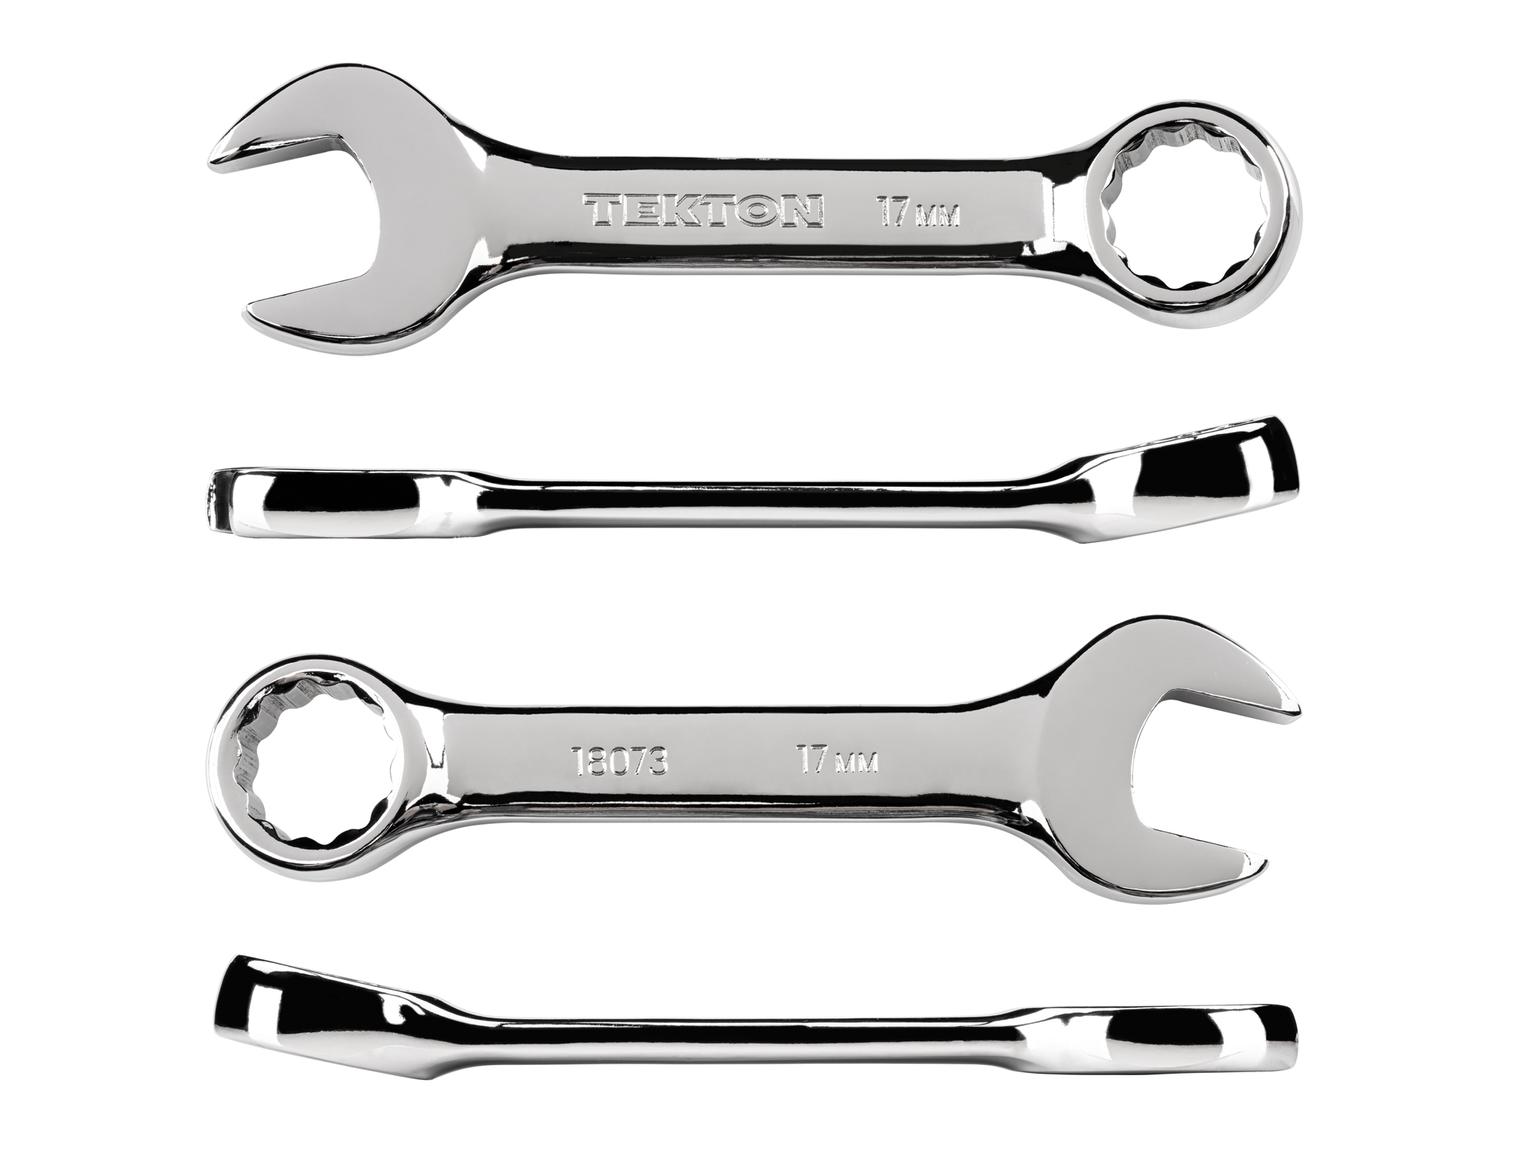 TEKTON 18073-T 17 mm Stubby Combination Wrench